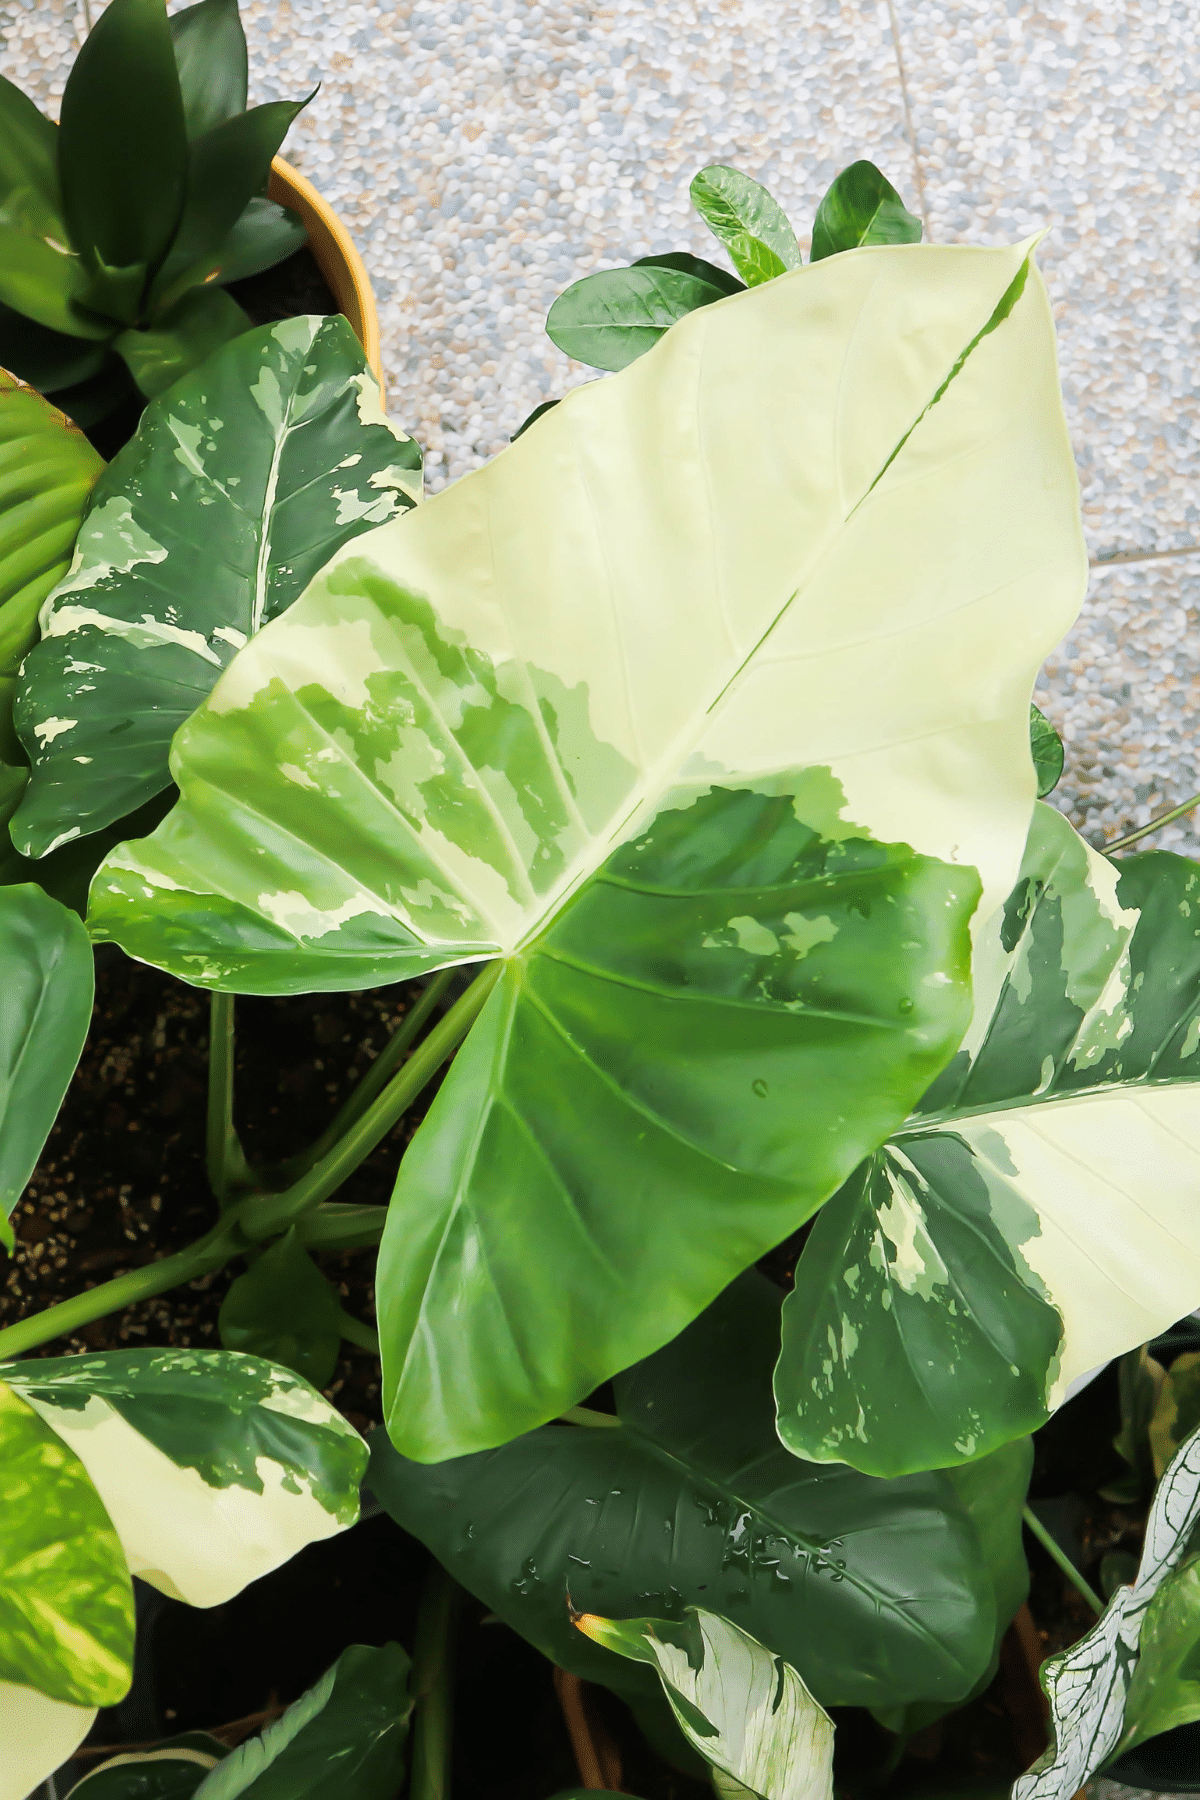 Close-up view of Variegated Alocasia on a concrete surface.